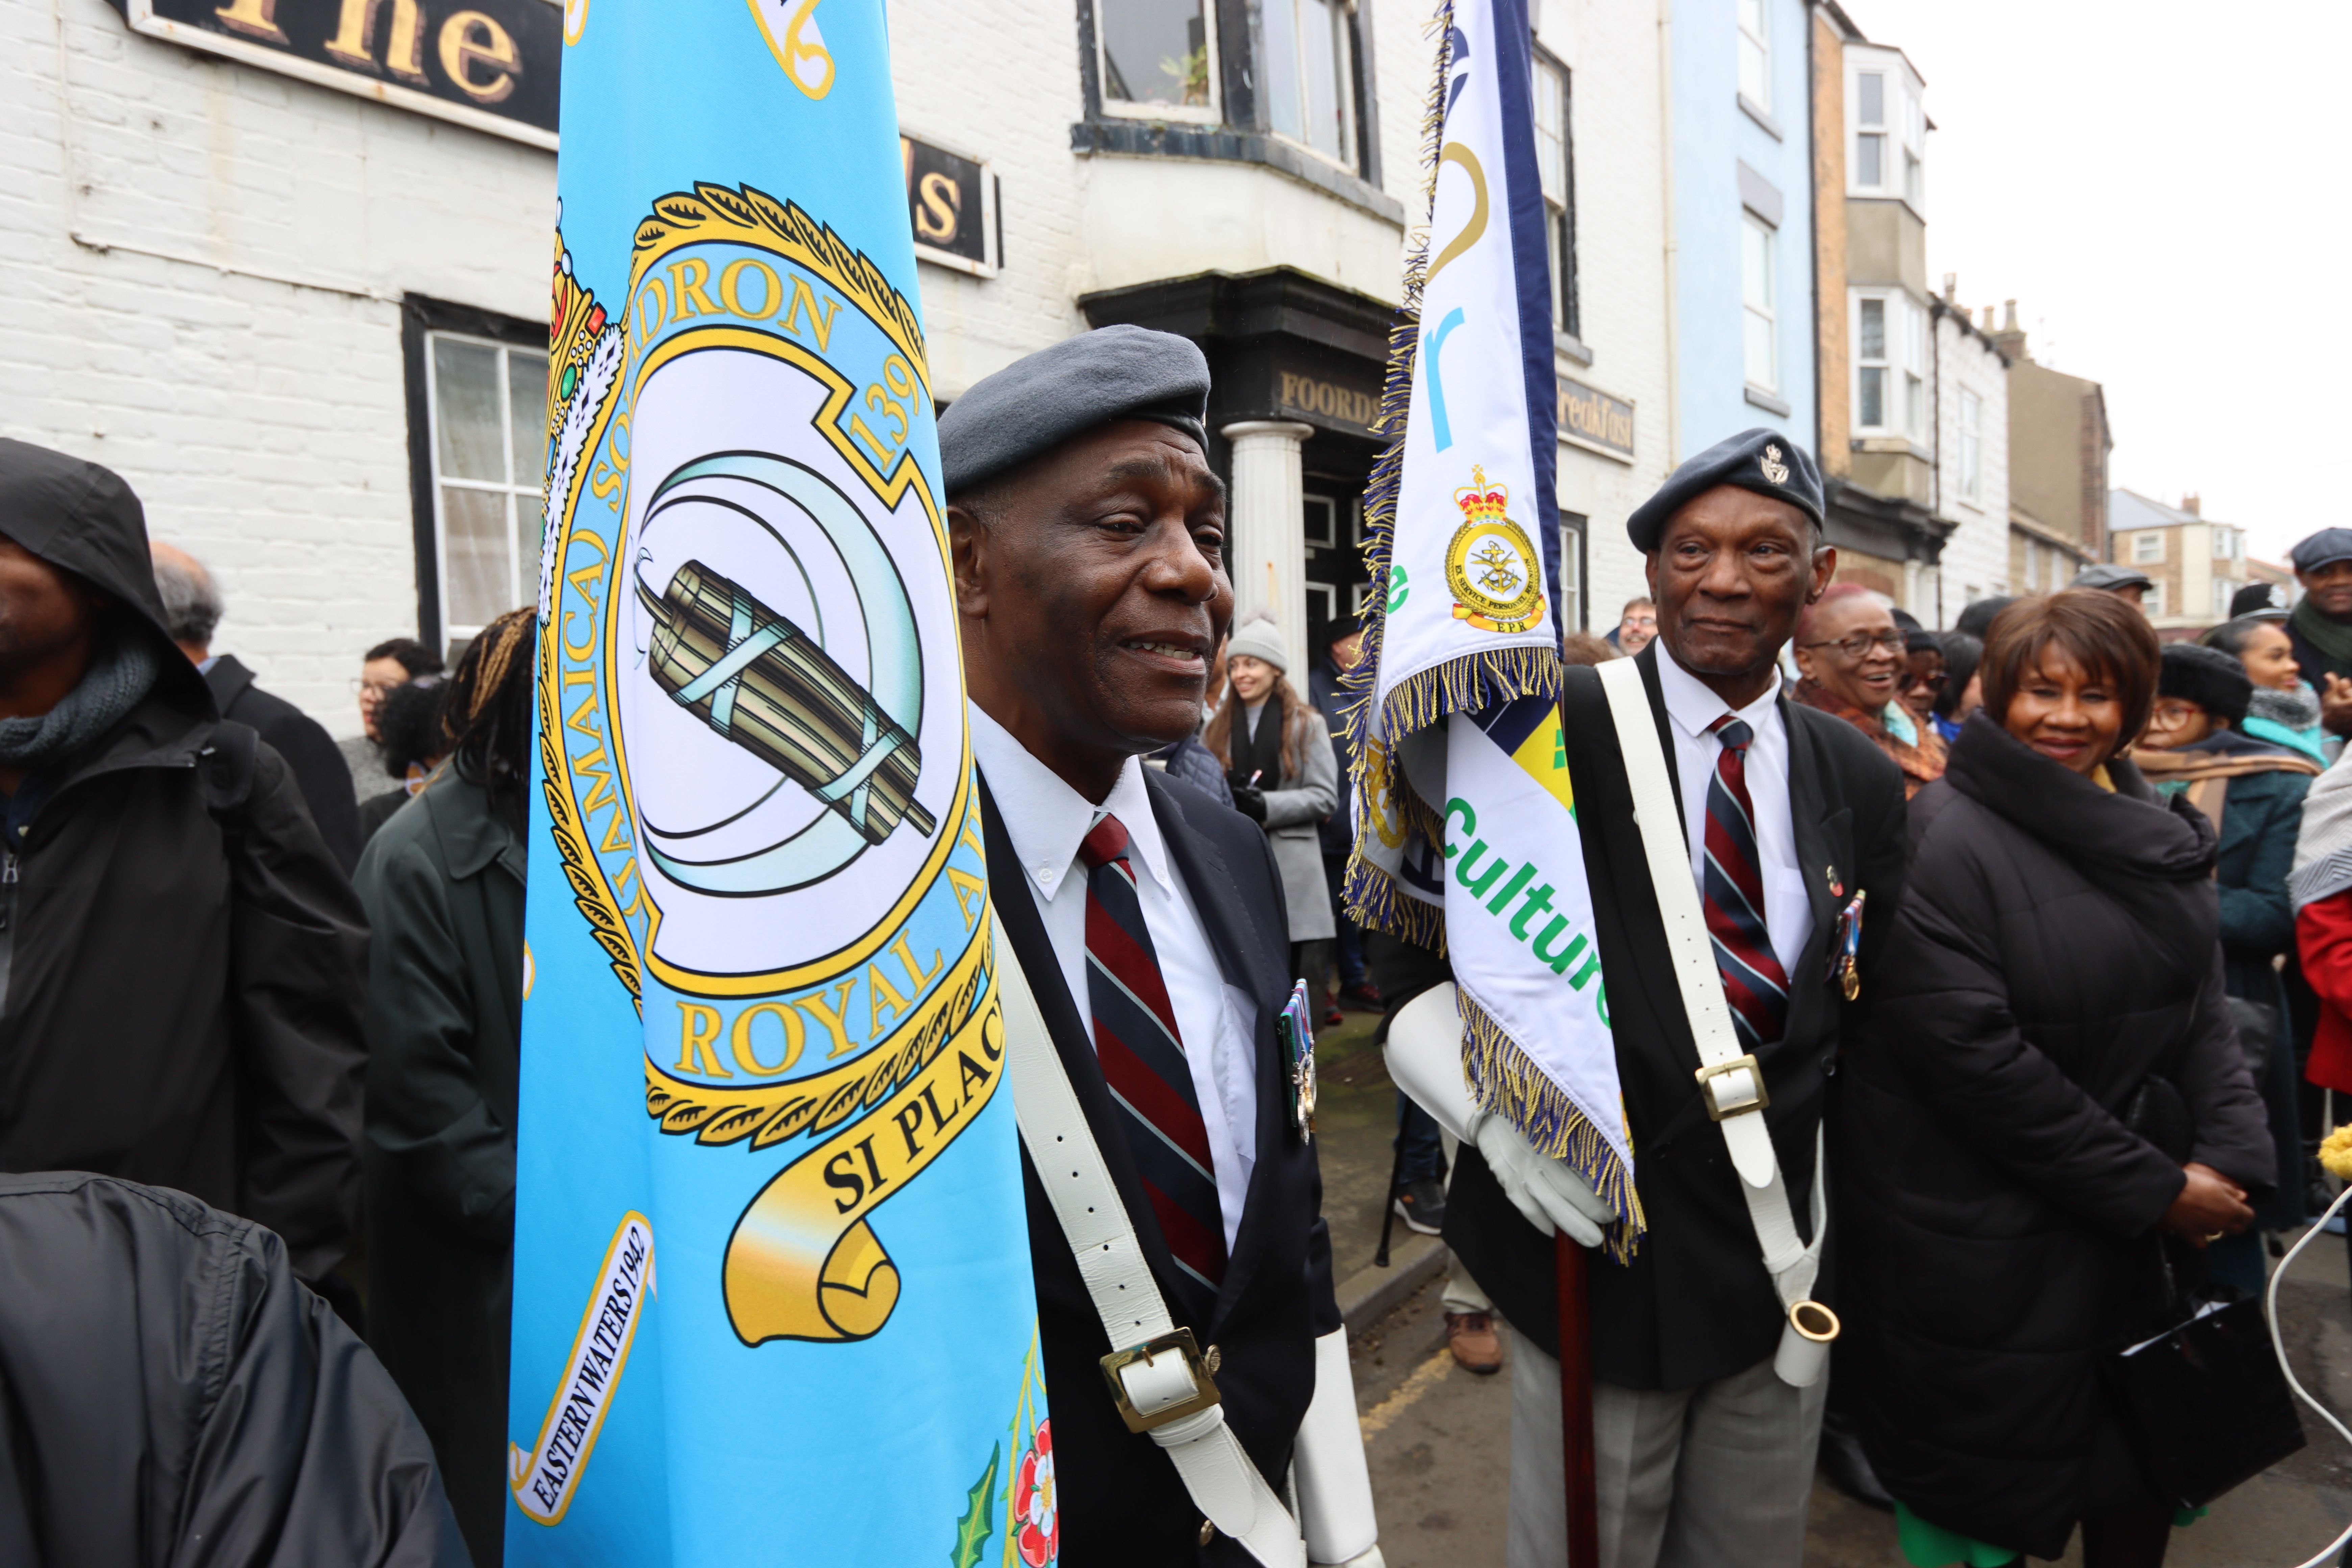 Image shows RAF Veterans carrying Squadron colour flag with civilians in the streets.